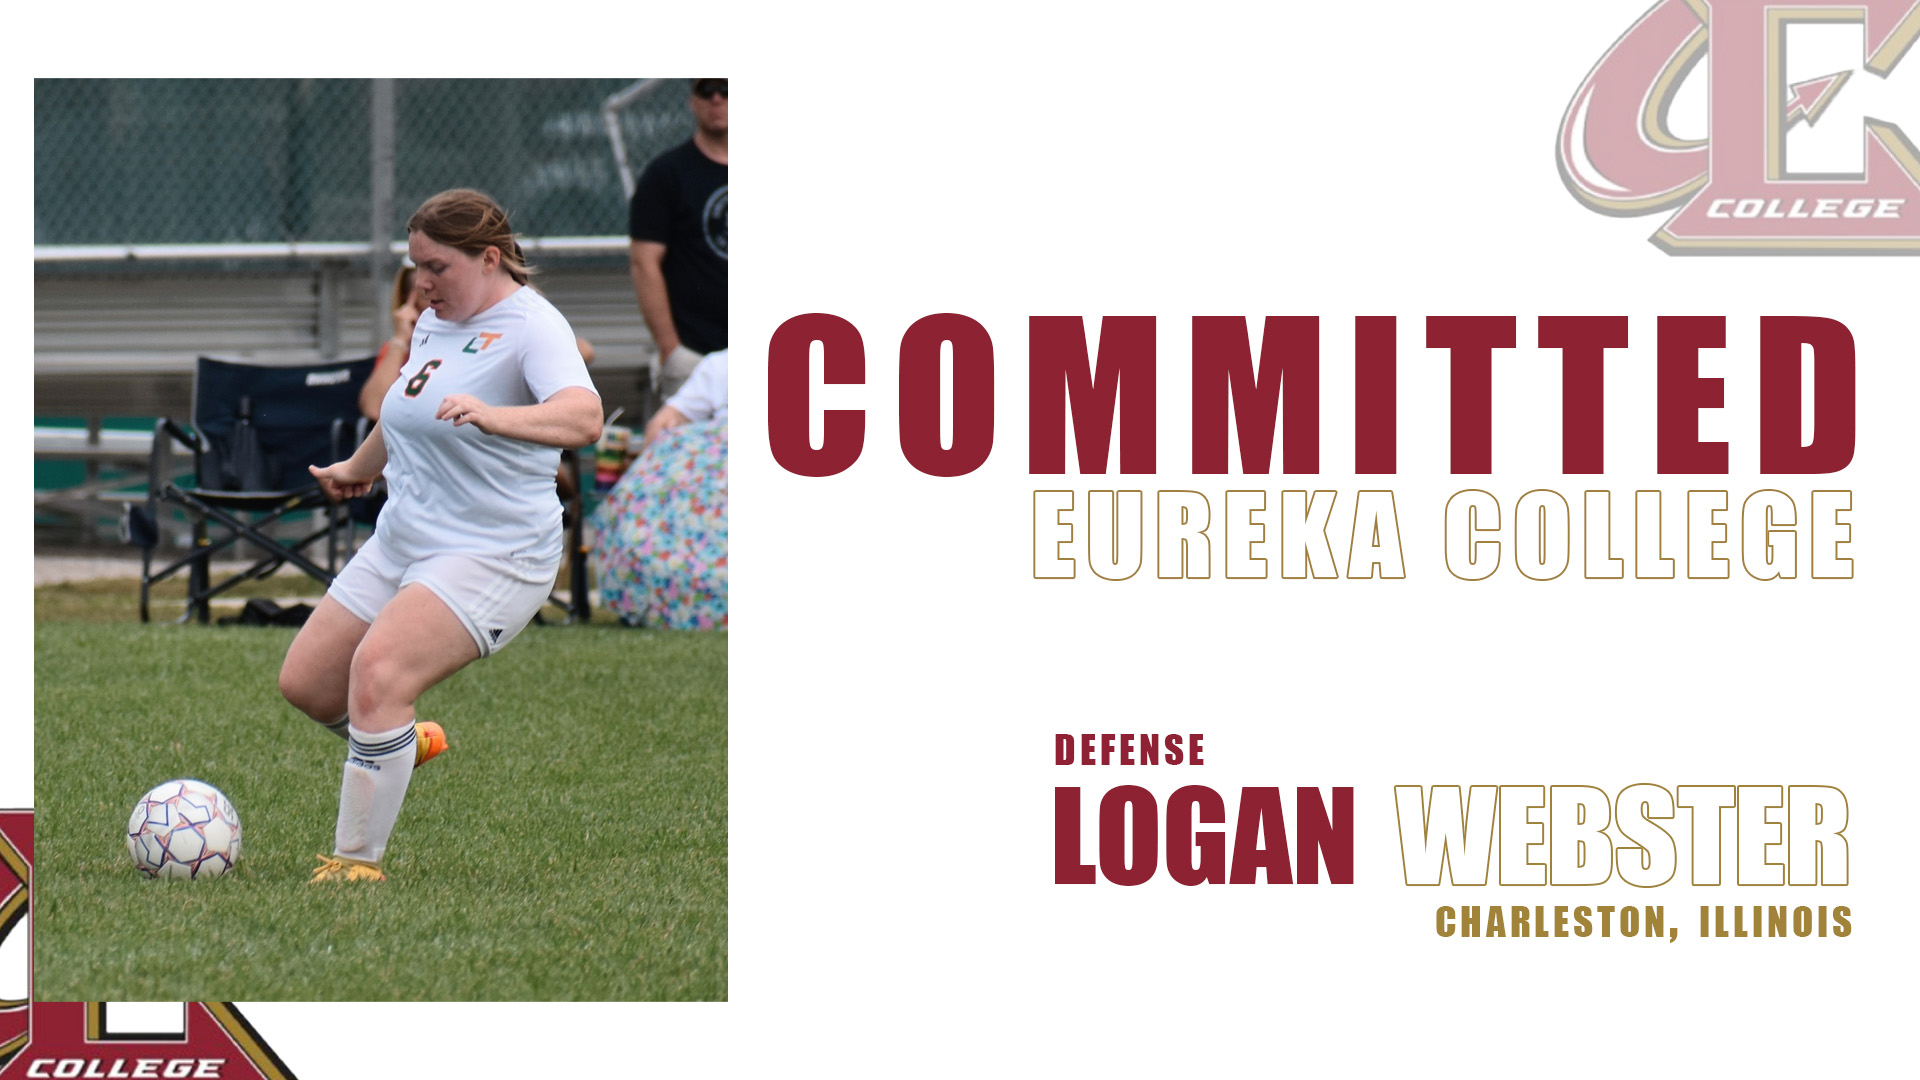 Women's Soccer Player Logan Webster Commits to Eureka College